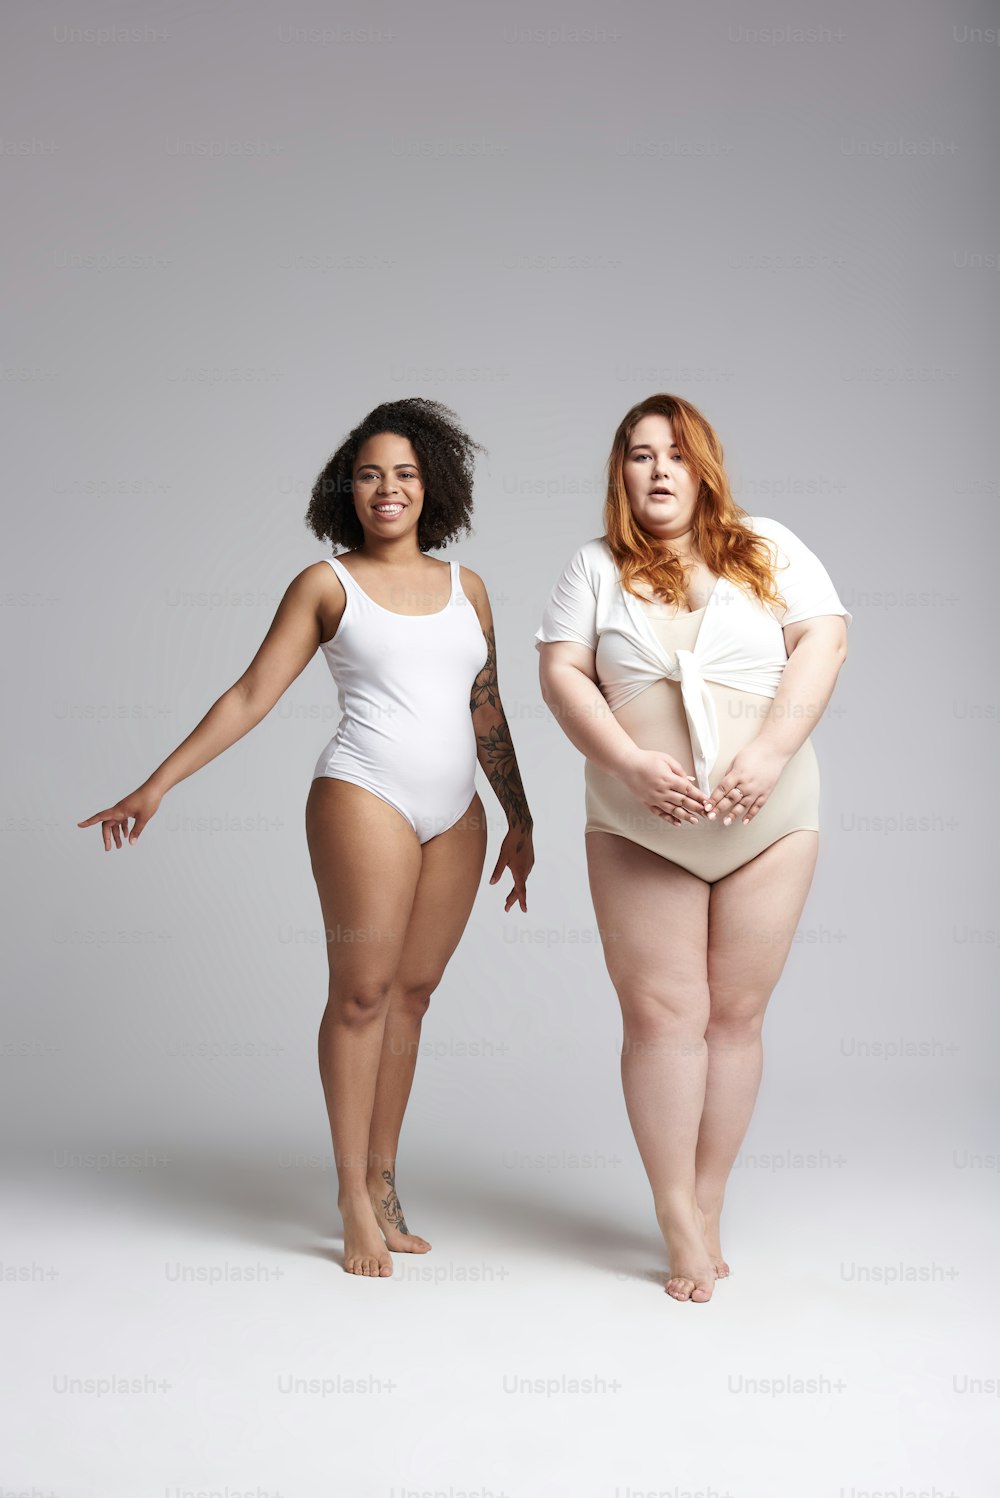 Curvy Women Pictures  Download Free Images on Unsplash